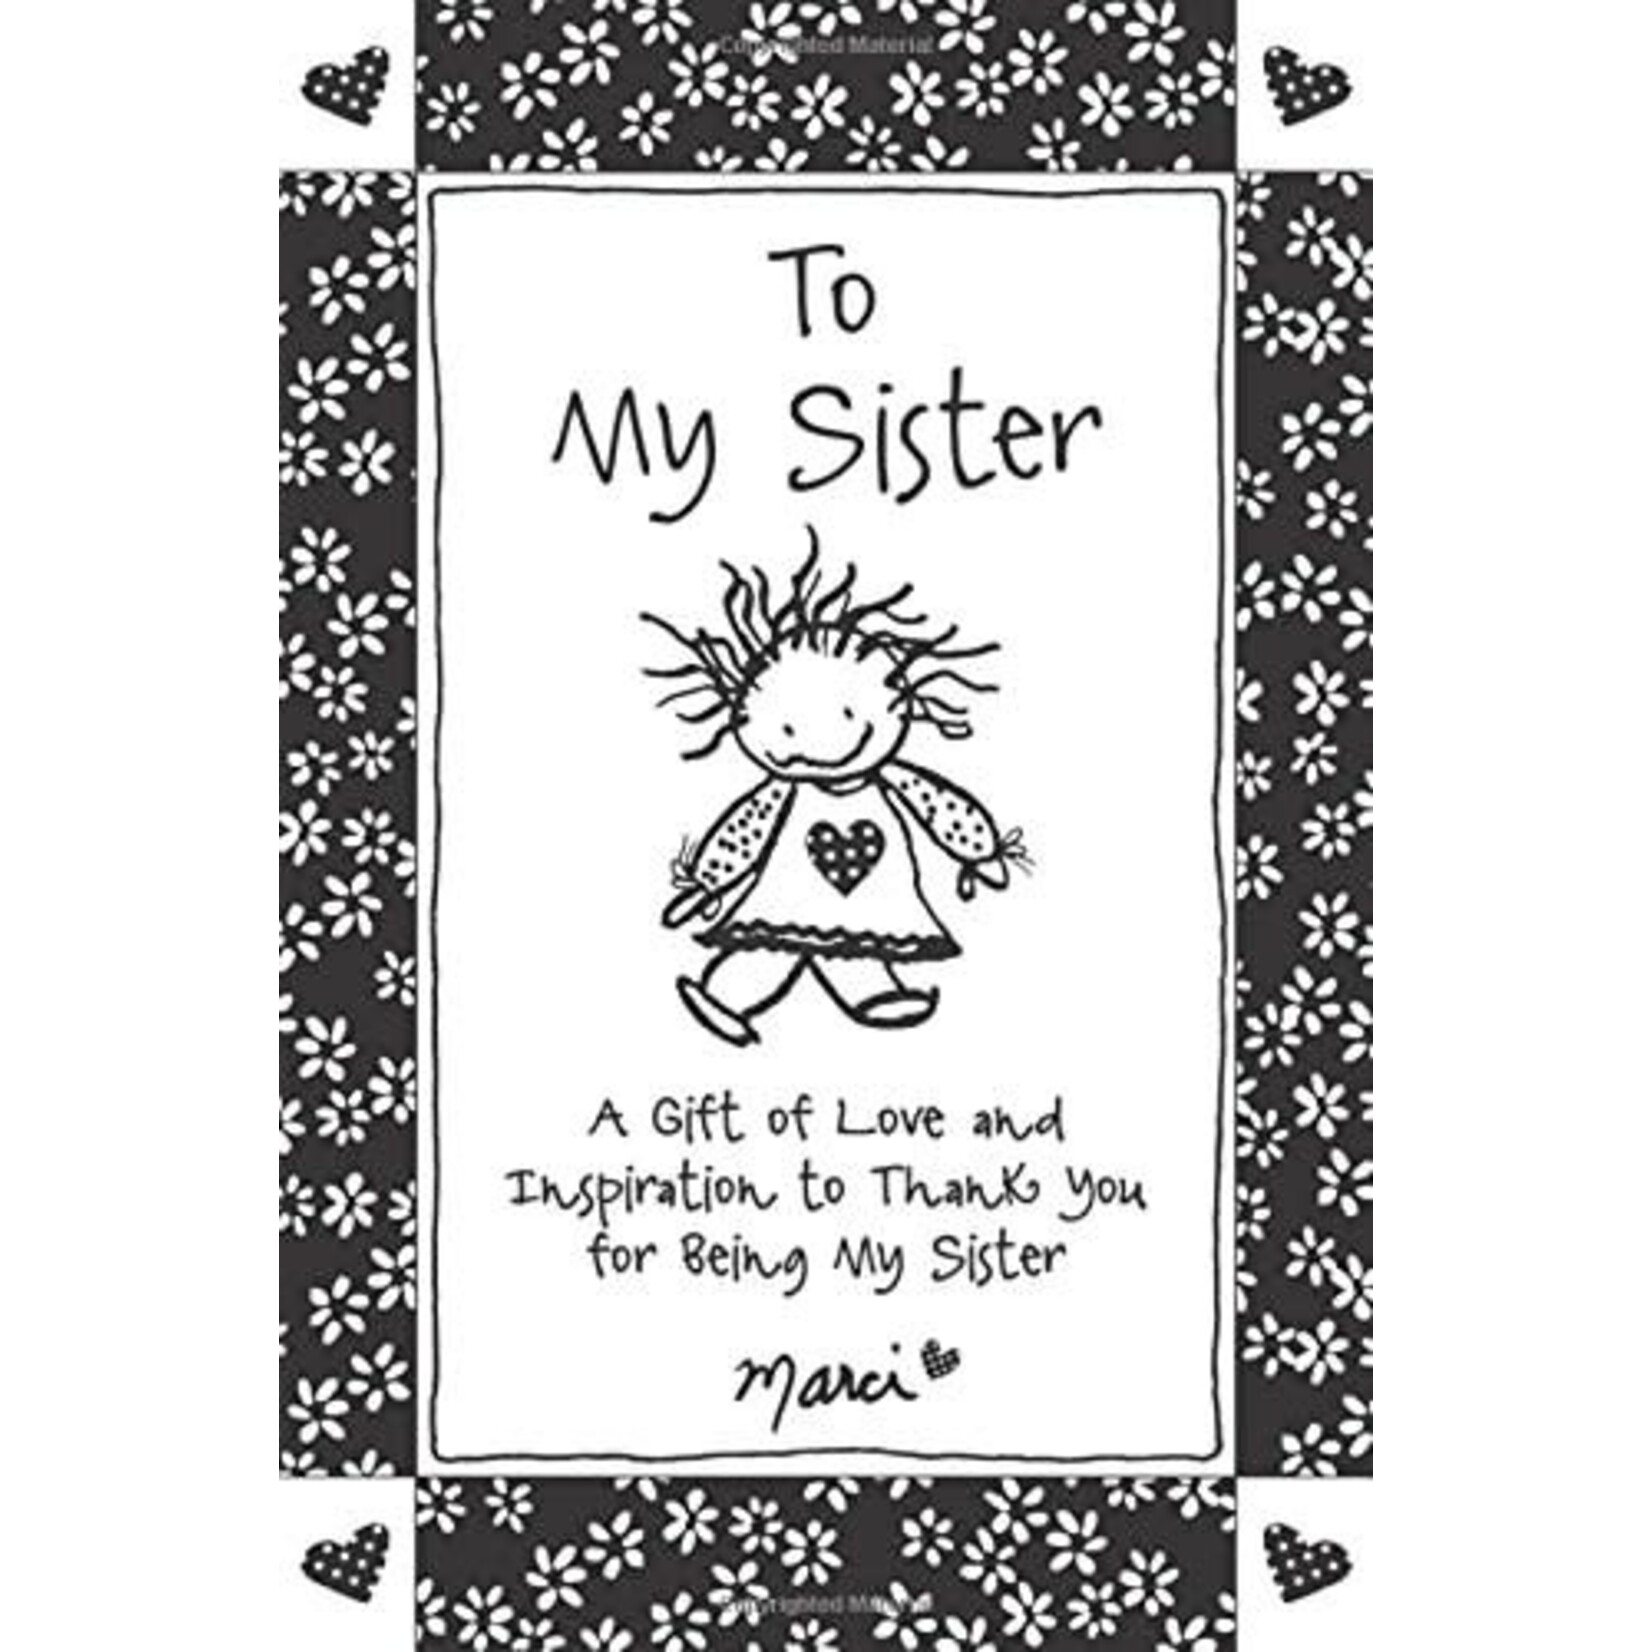 Marci To My Sister Book